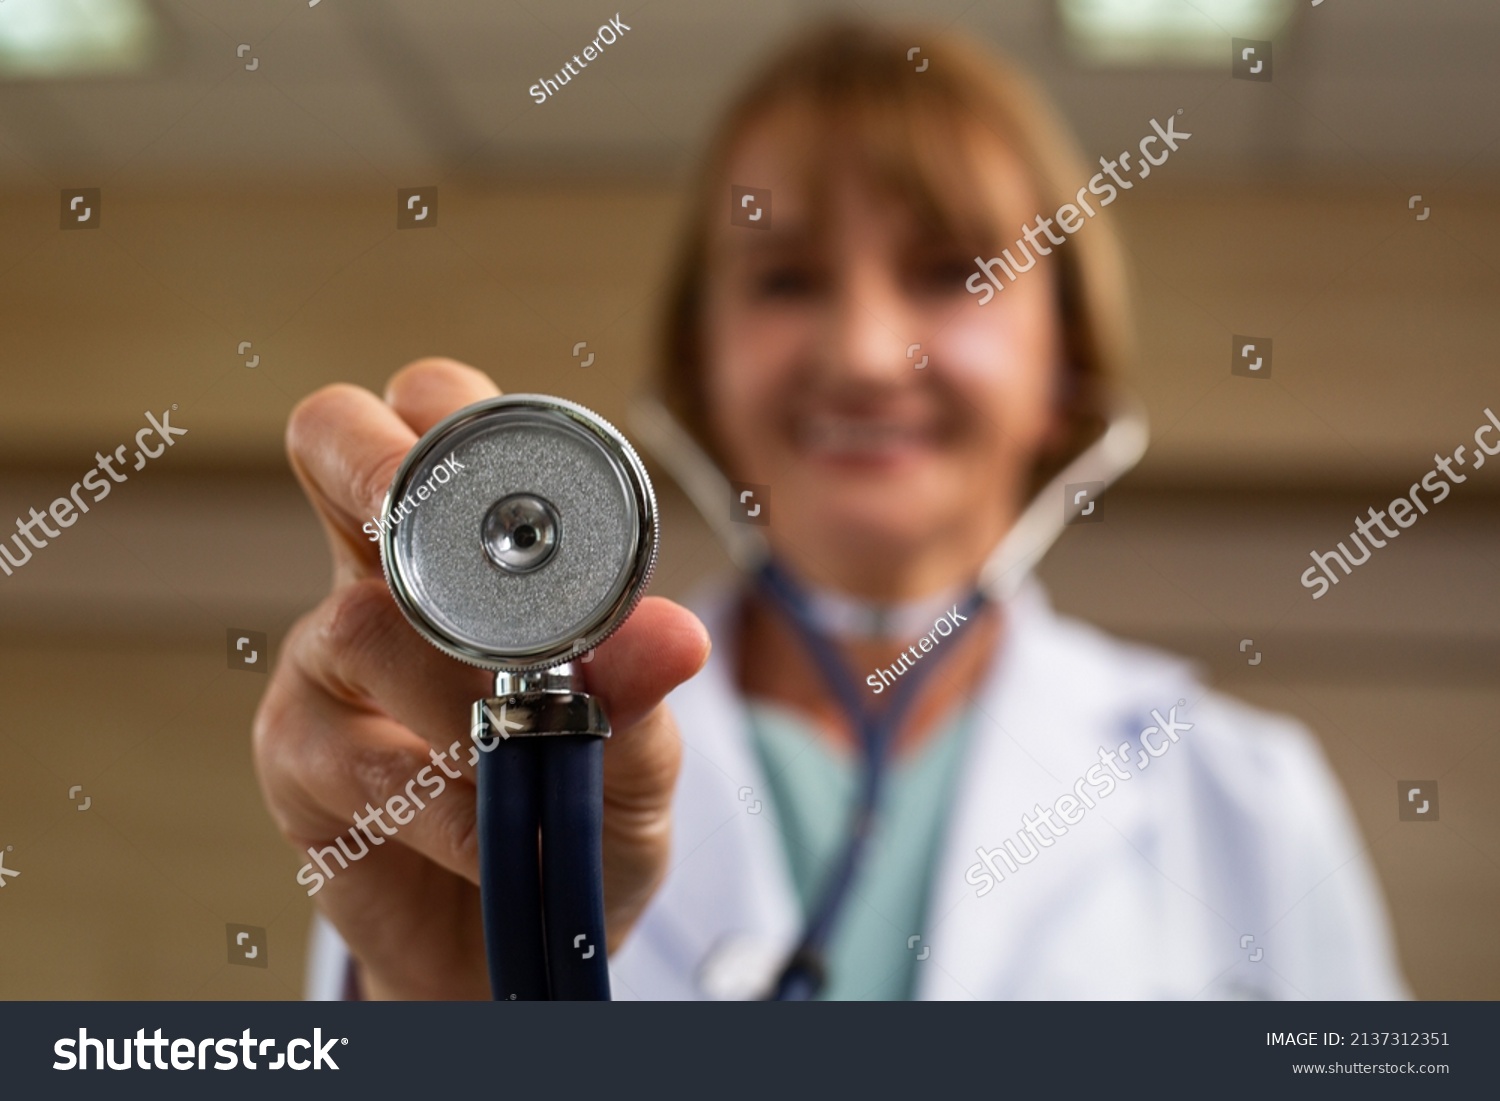 Medicare doctor holding stethoscope for support patient person in hospital. #2137312351